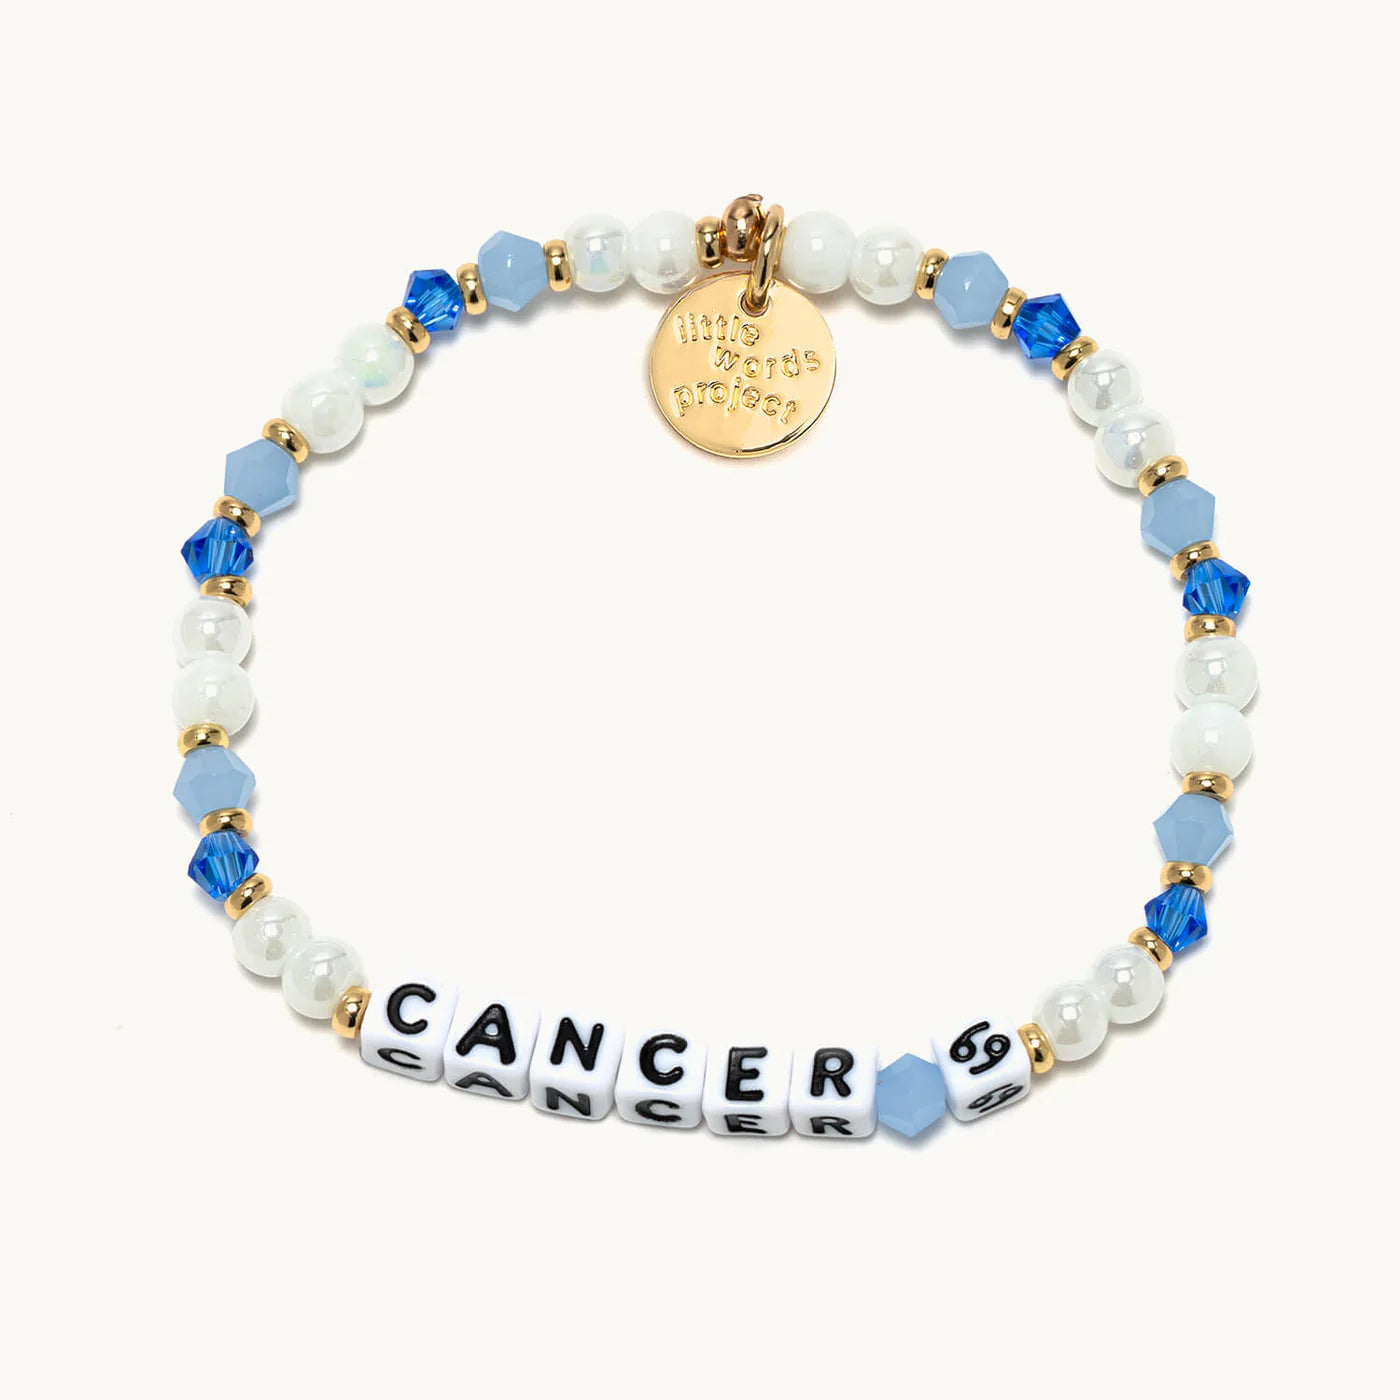 A gold and blue beaded bracelet from Little Words Project®, with the Cancer zodiac symbol.